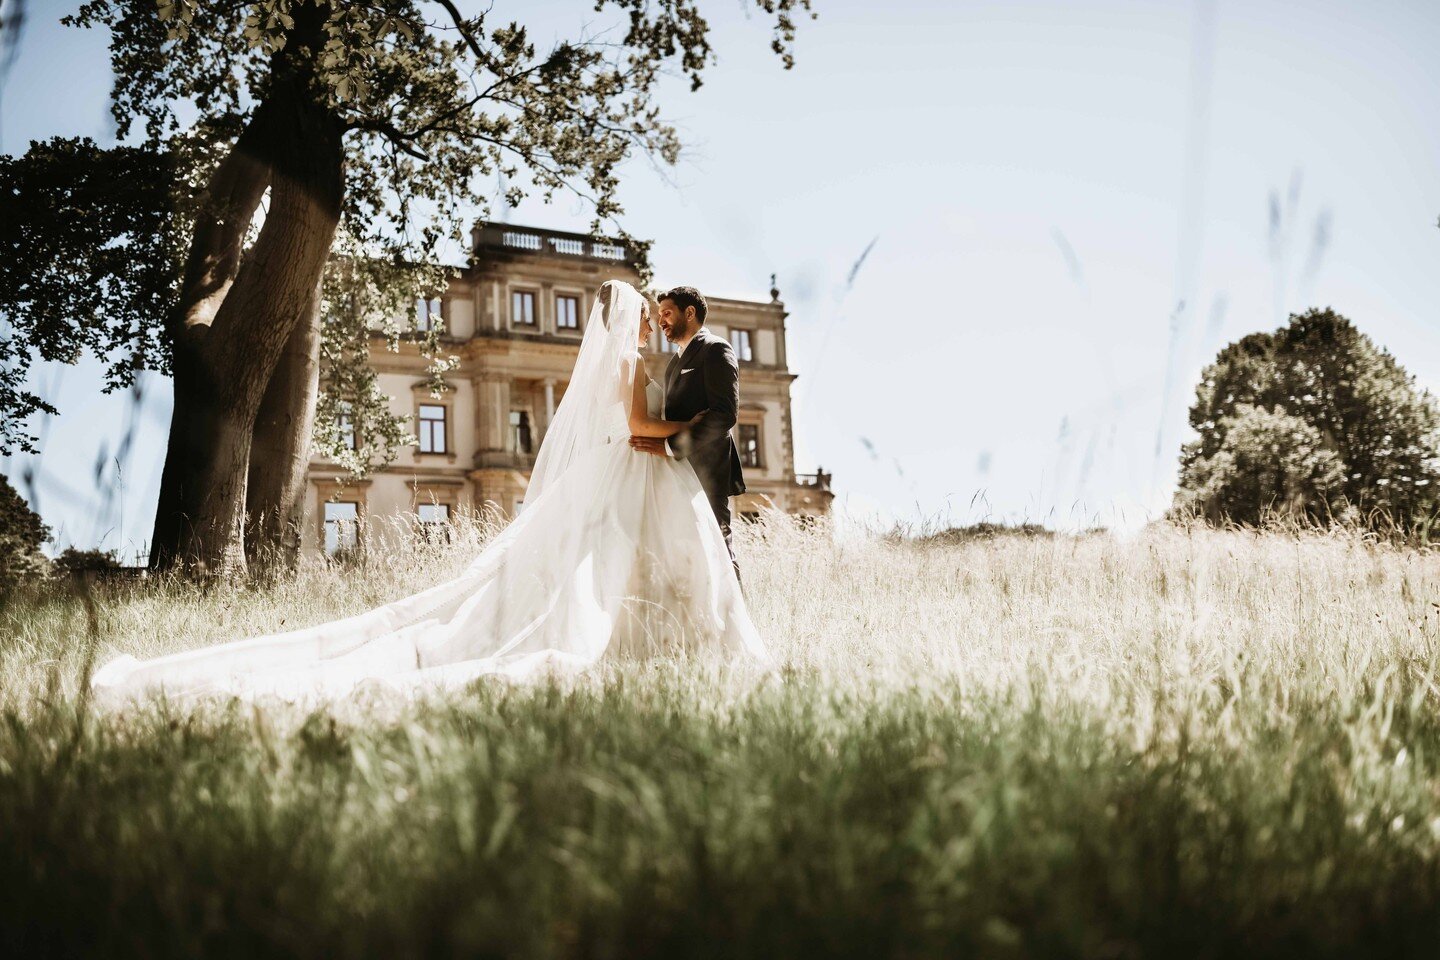 An Amsterdam wedding! We had the pleaseure of shooting the video and photography with Oren &amp; Jocie @orangerie_elswout #destinationwedding #dutchwedding #jewishwedding #amsterdamwedding